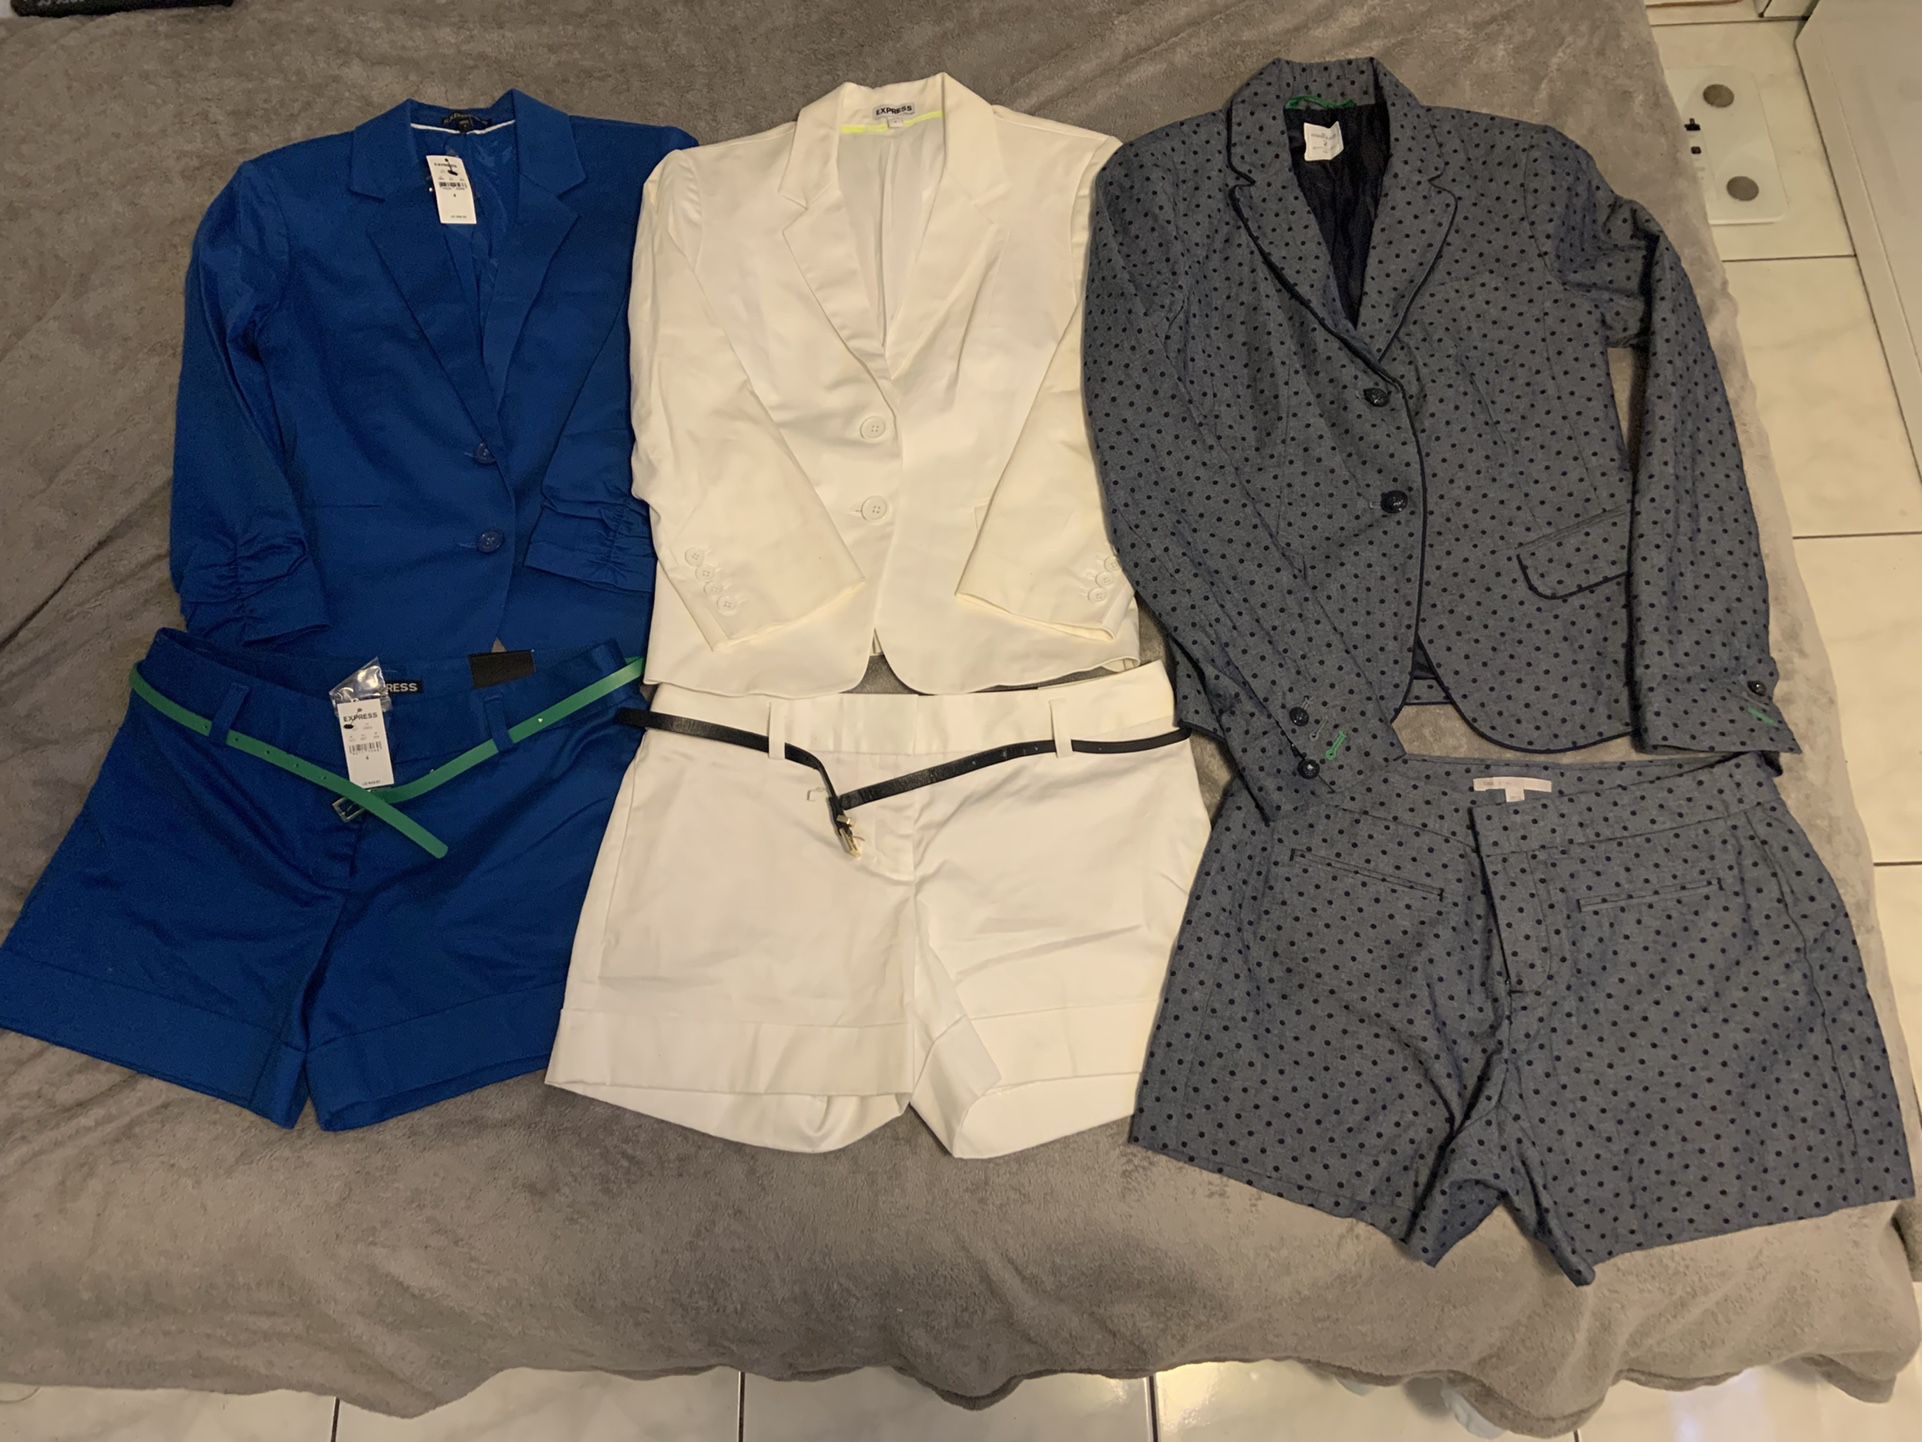 Clothing. New Shorts And  Jacket  Matching Suit Sets  Express And Gap Small Sizes.  Each Set Is  $70  (white Sold)